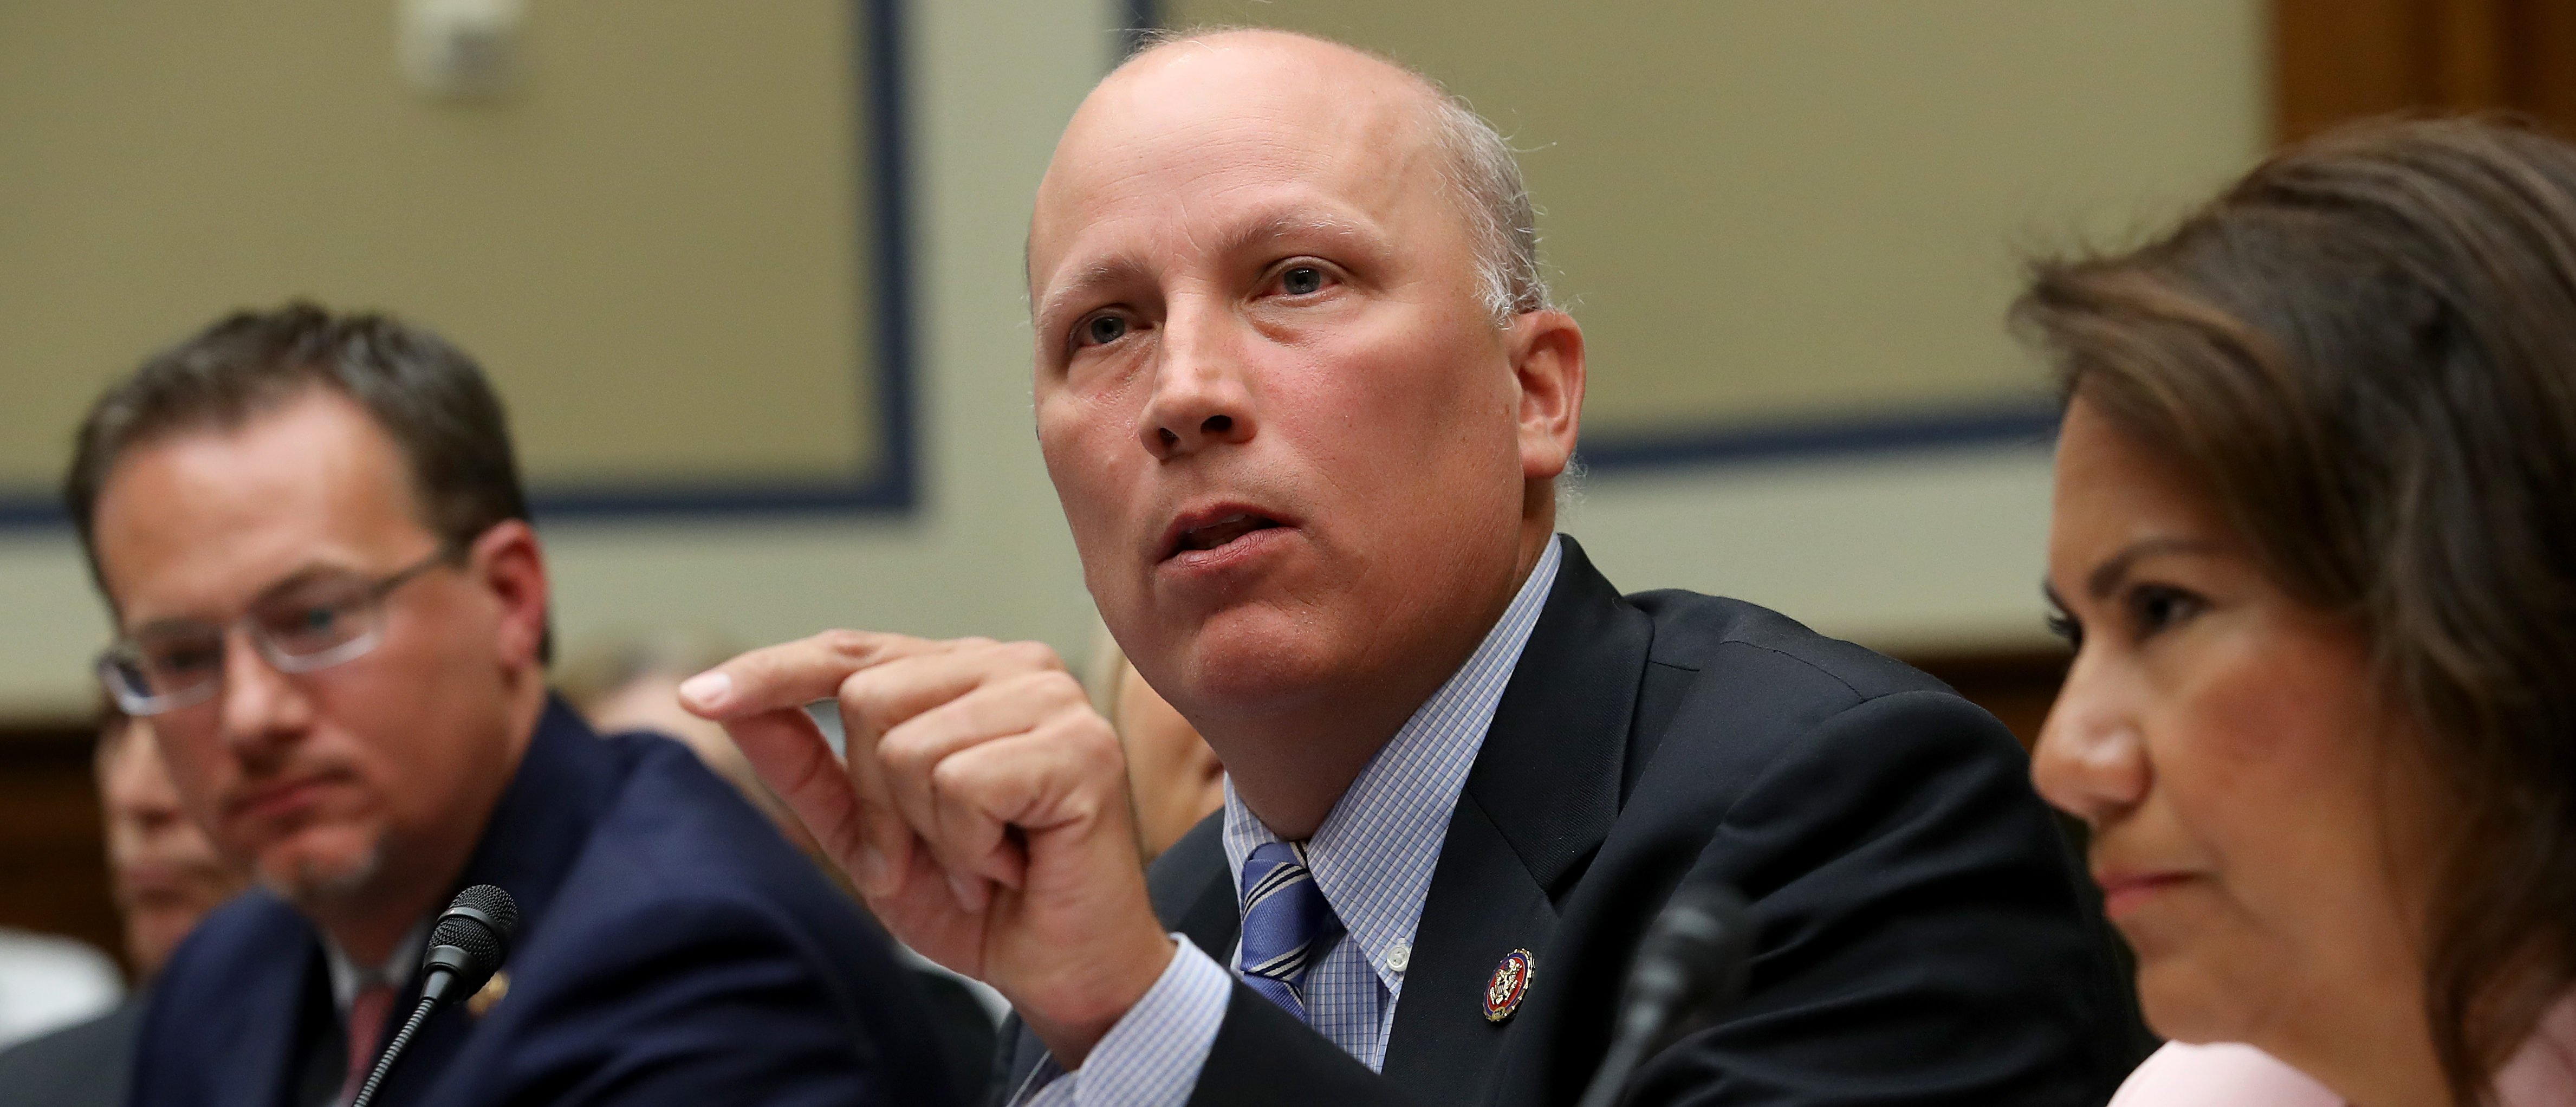 Rep. Chip Roy testifies before a House Oversight and Reform Committee hearing on "The Trump Administration's Child Separation Policy: Substantiated Allegations of Mistreatment." (Win McNamee/Getty Images)